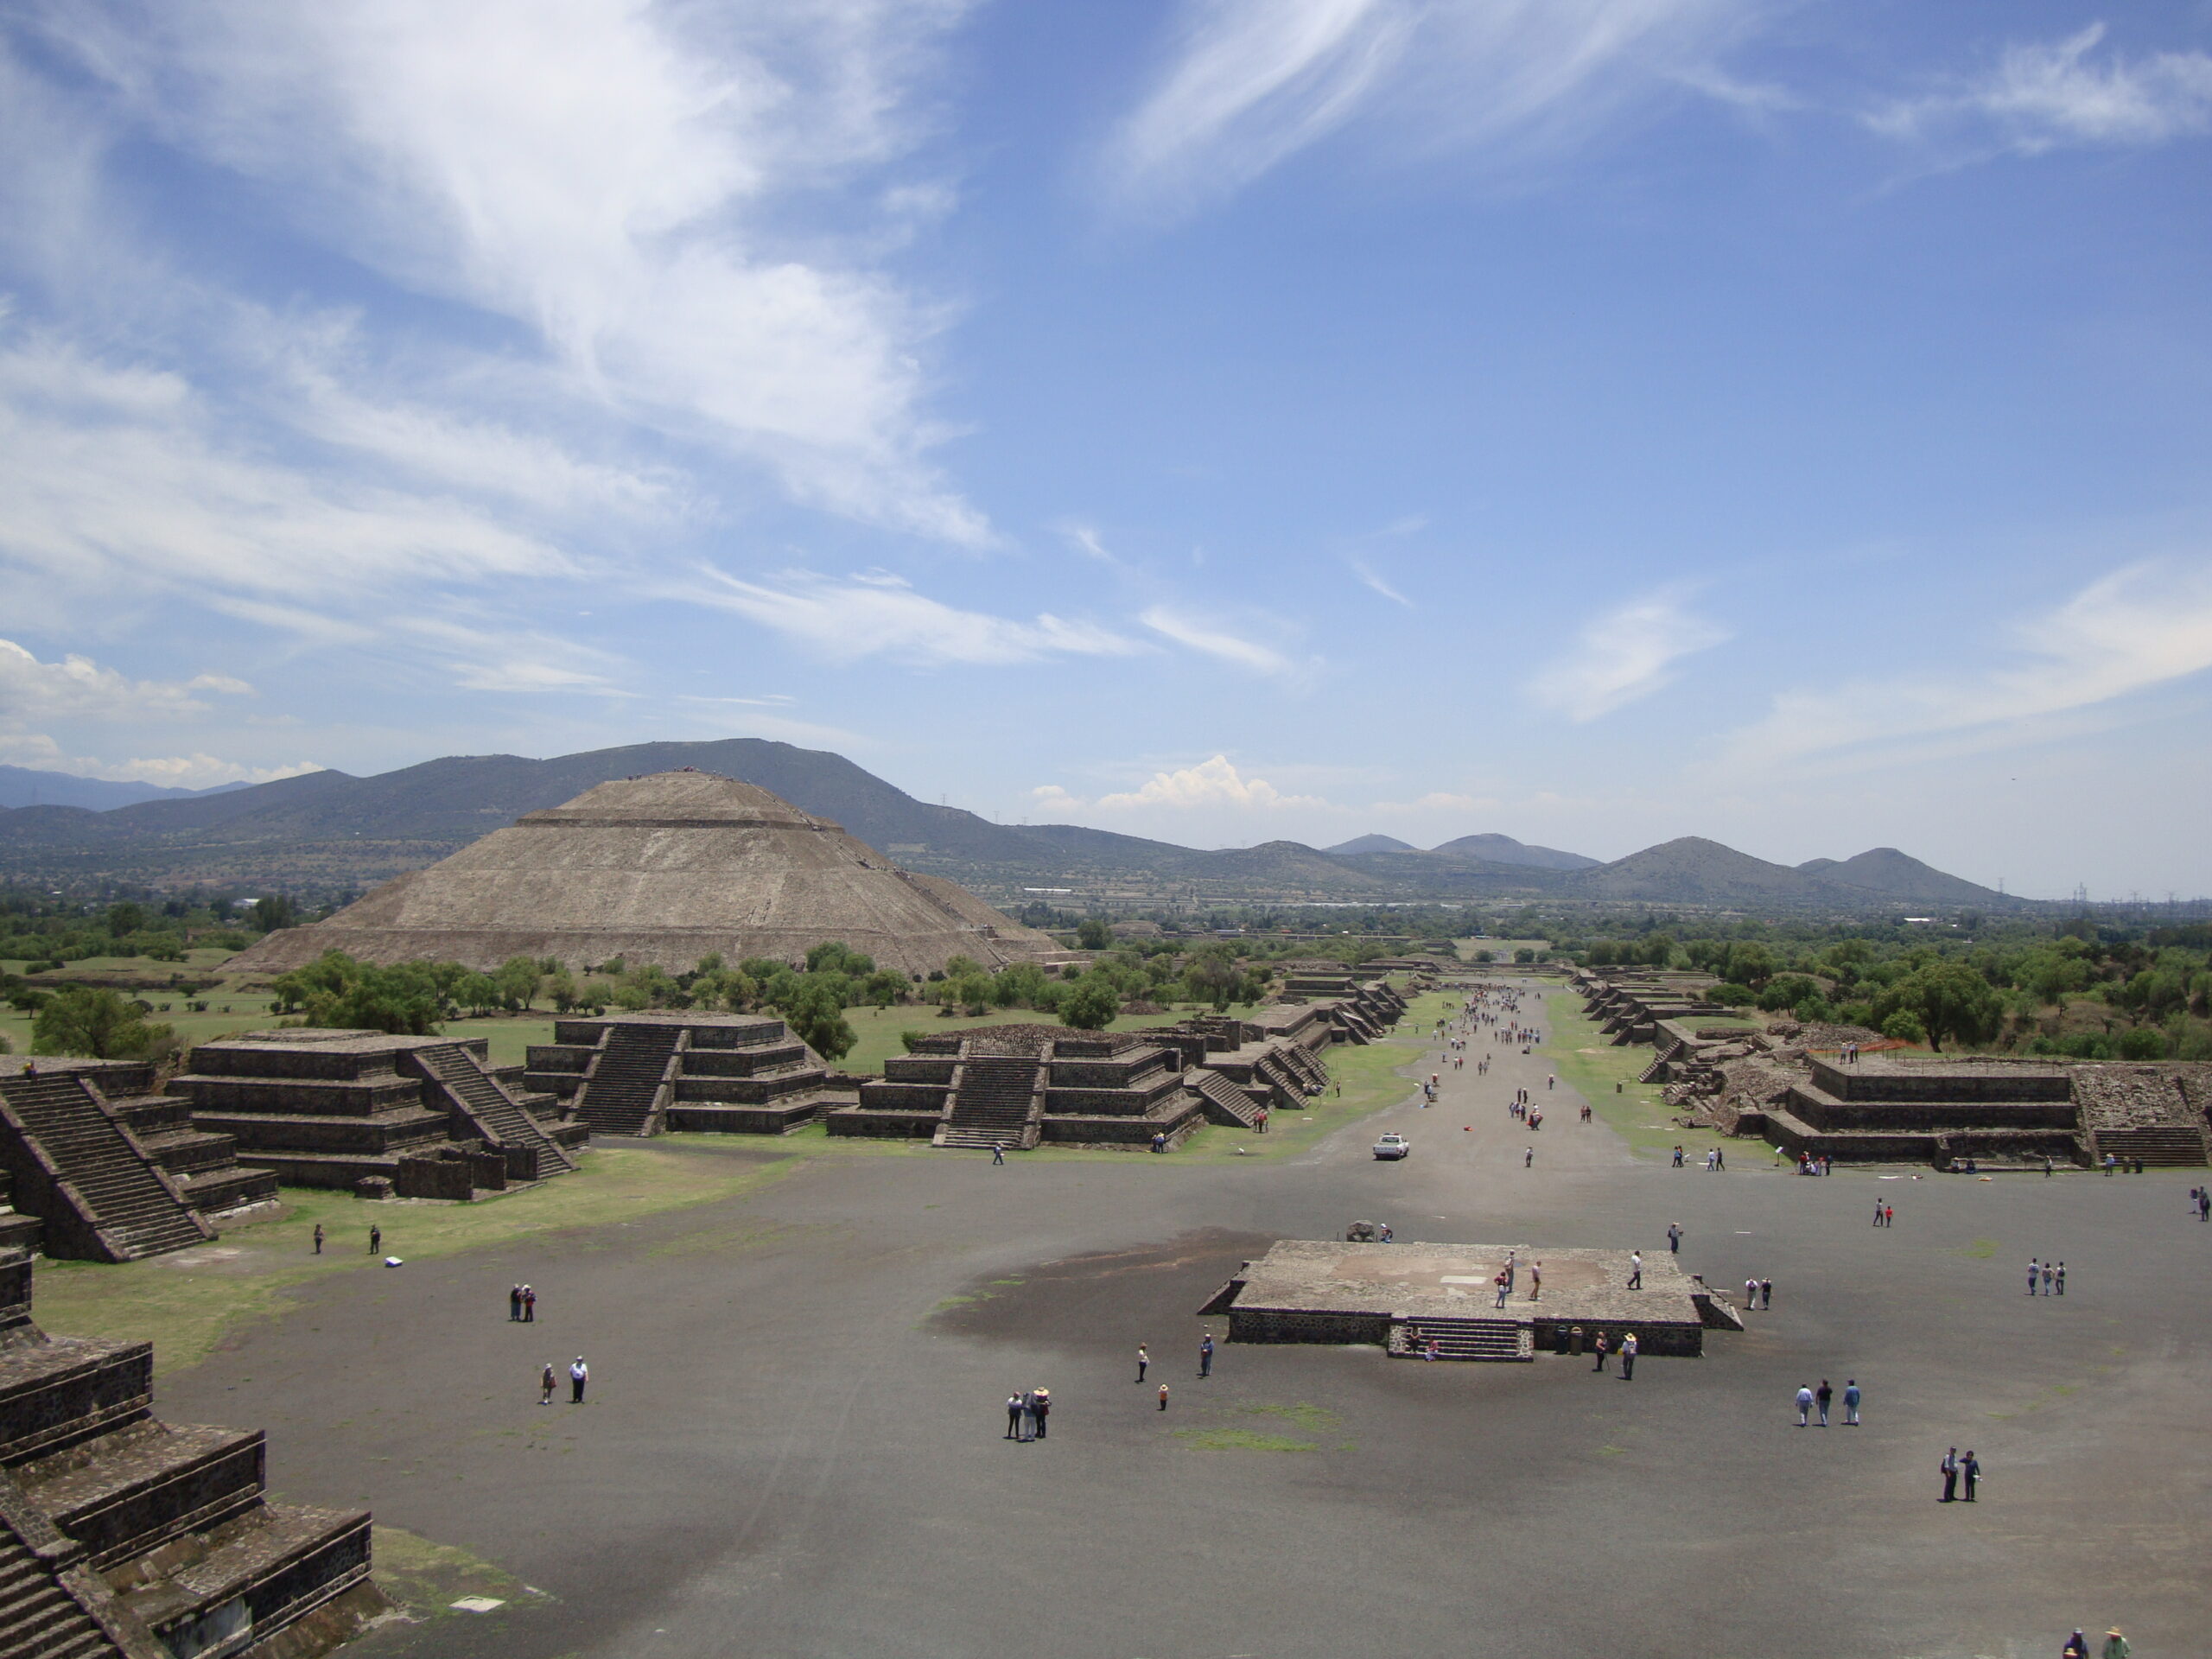 Teotihuacan Mexique